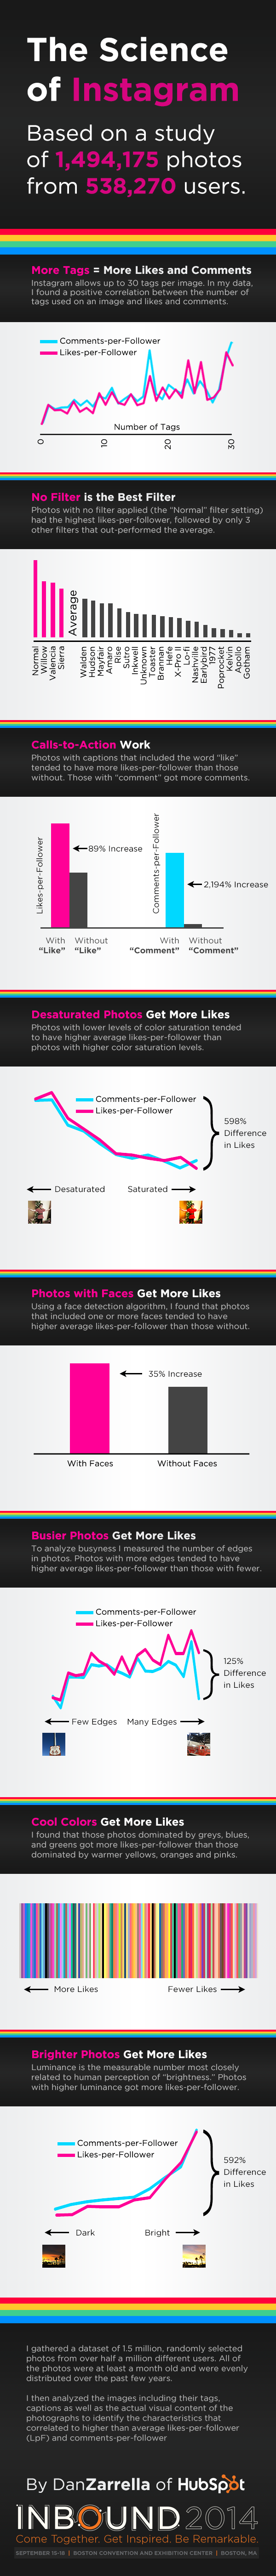 instagram likes and followers infographic